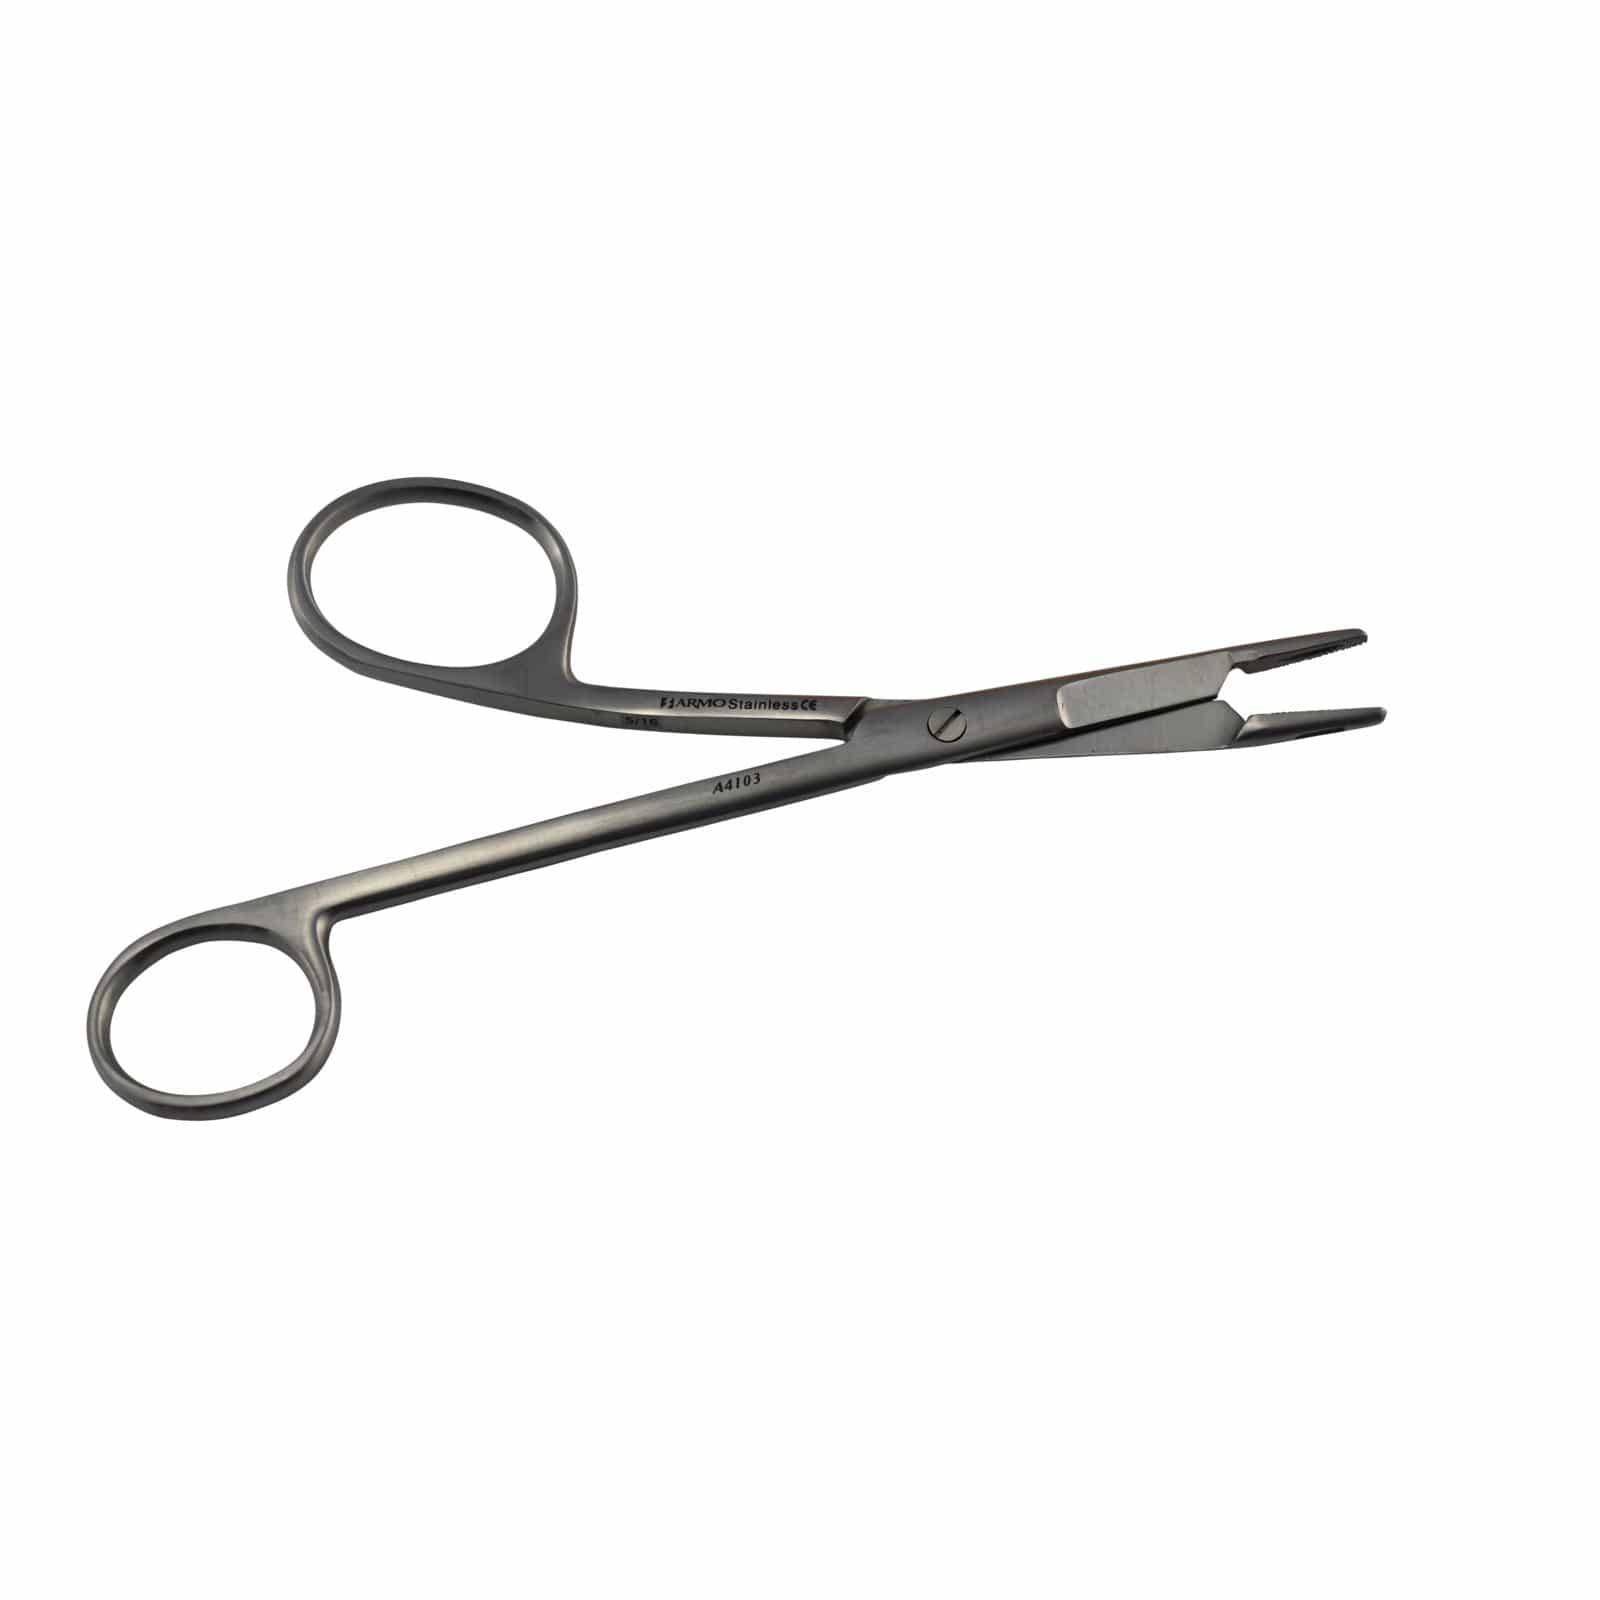 Armo Surgical Instruments 16cm / Left Handed / Standard Armo Gillies Needle Holder